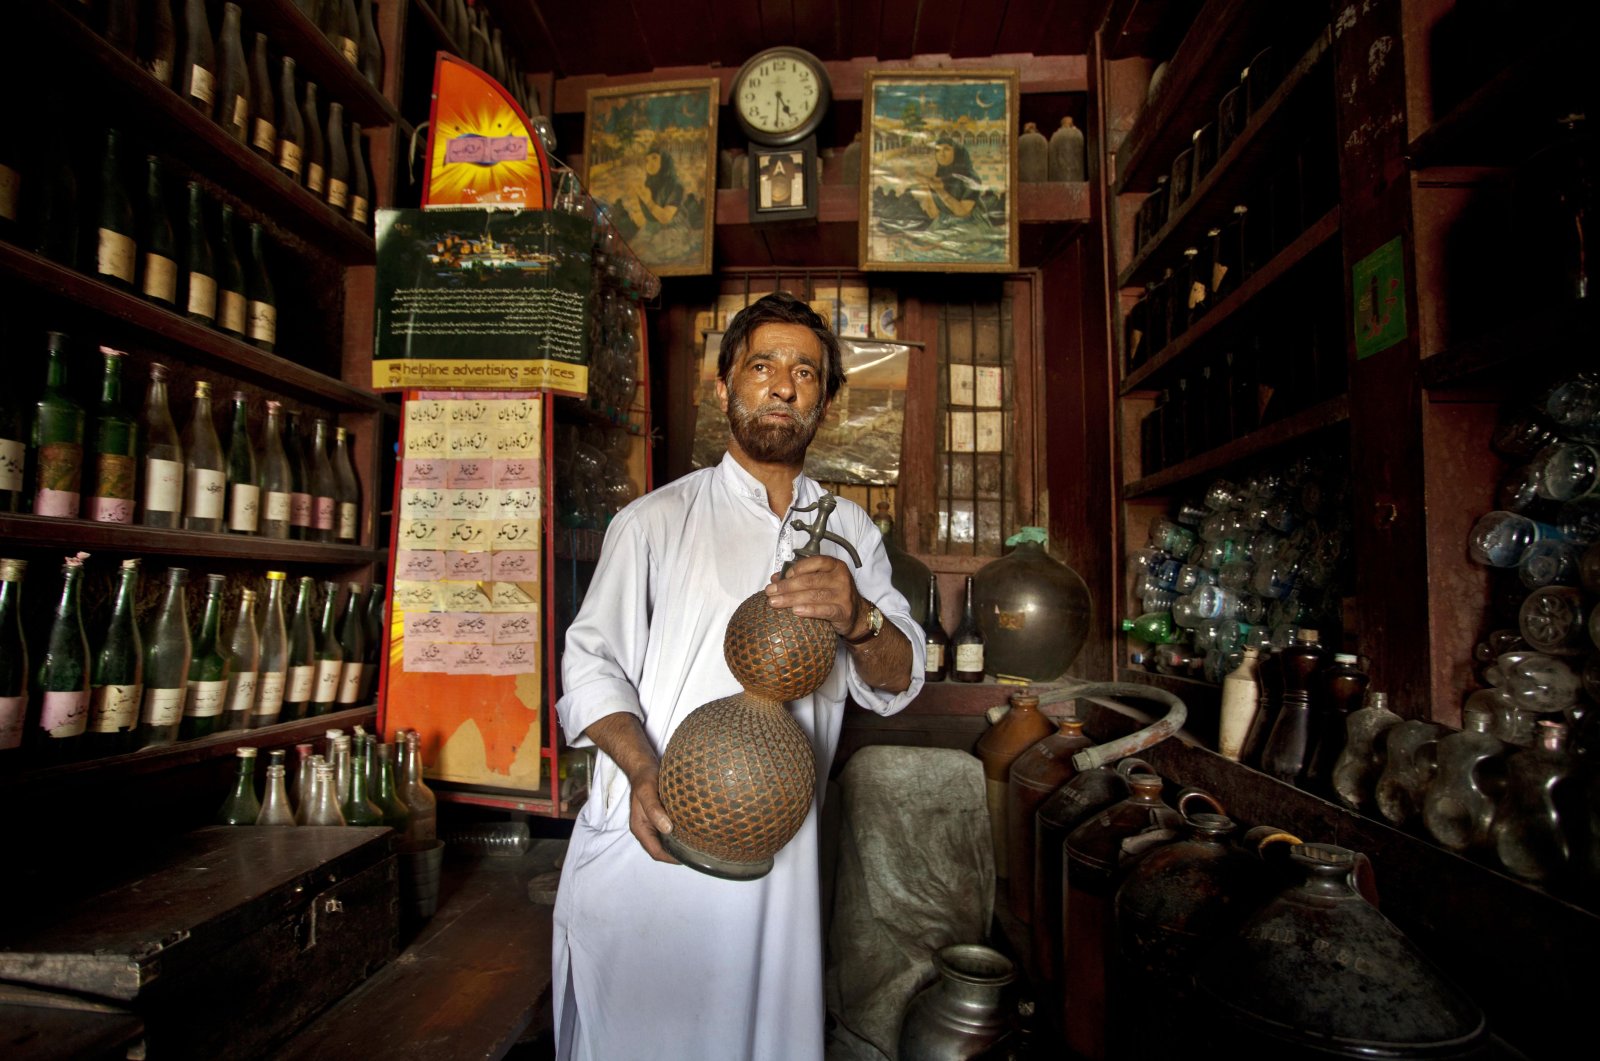 Abdul Aziz Kozgar poses for a picture as he holds a 100 to 150 year old glass jar at his shop in down town area of Srinagar, Kashmir, June 23, 2012. (AP Photo) 